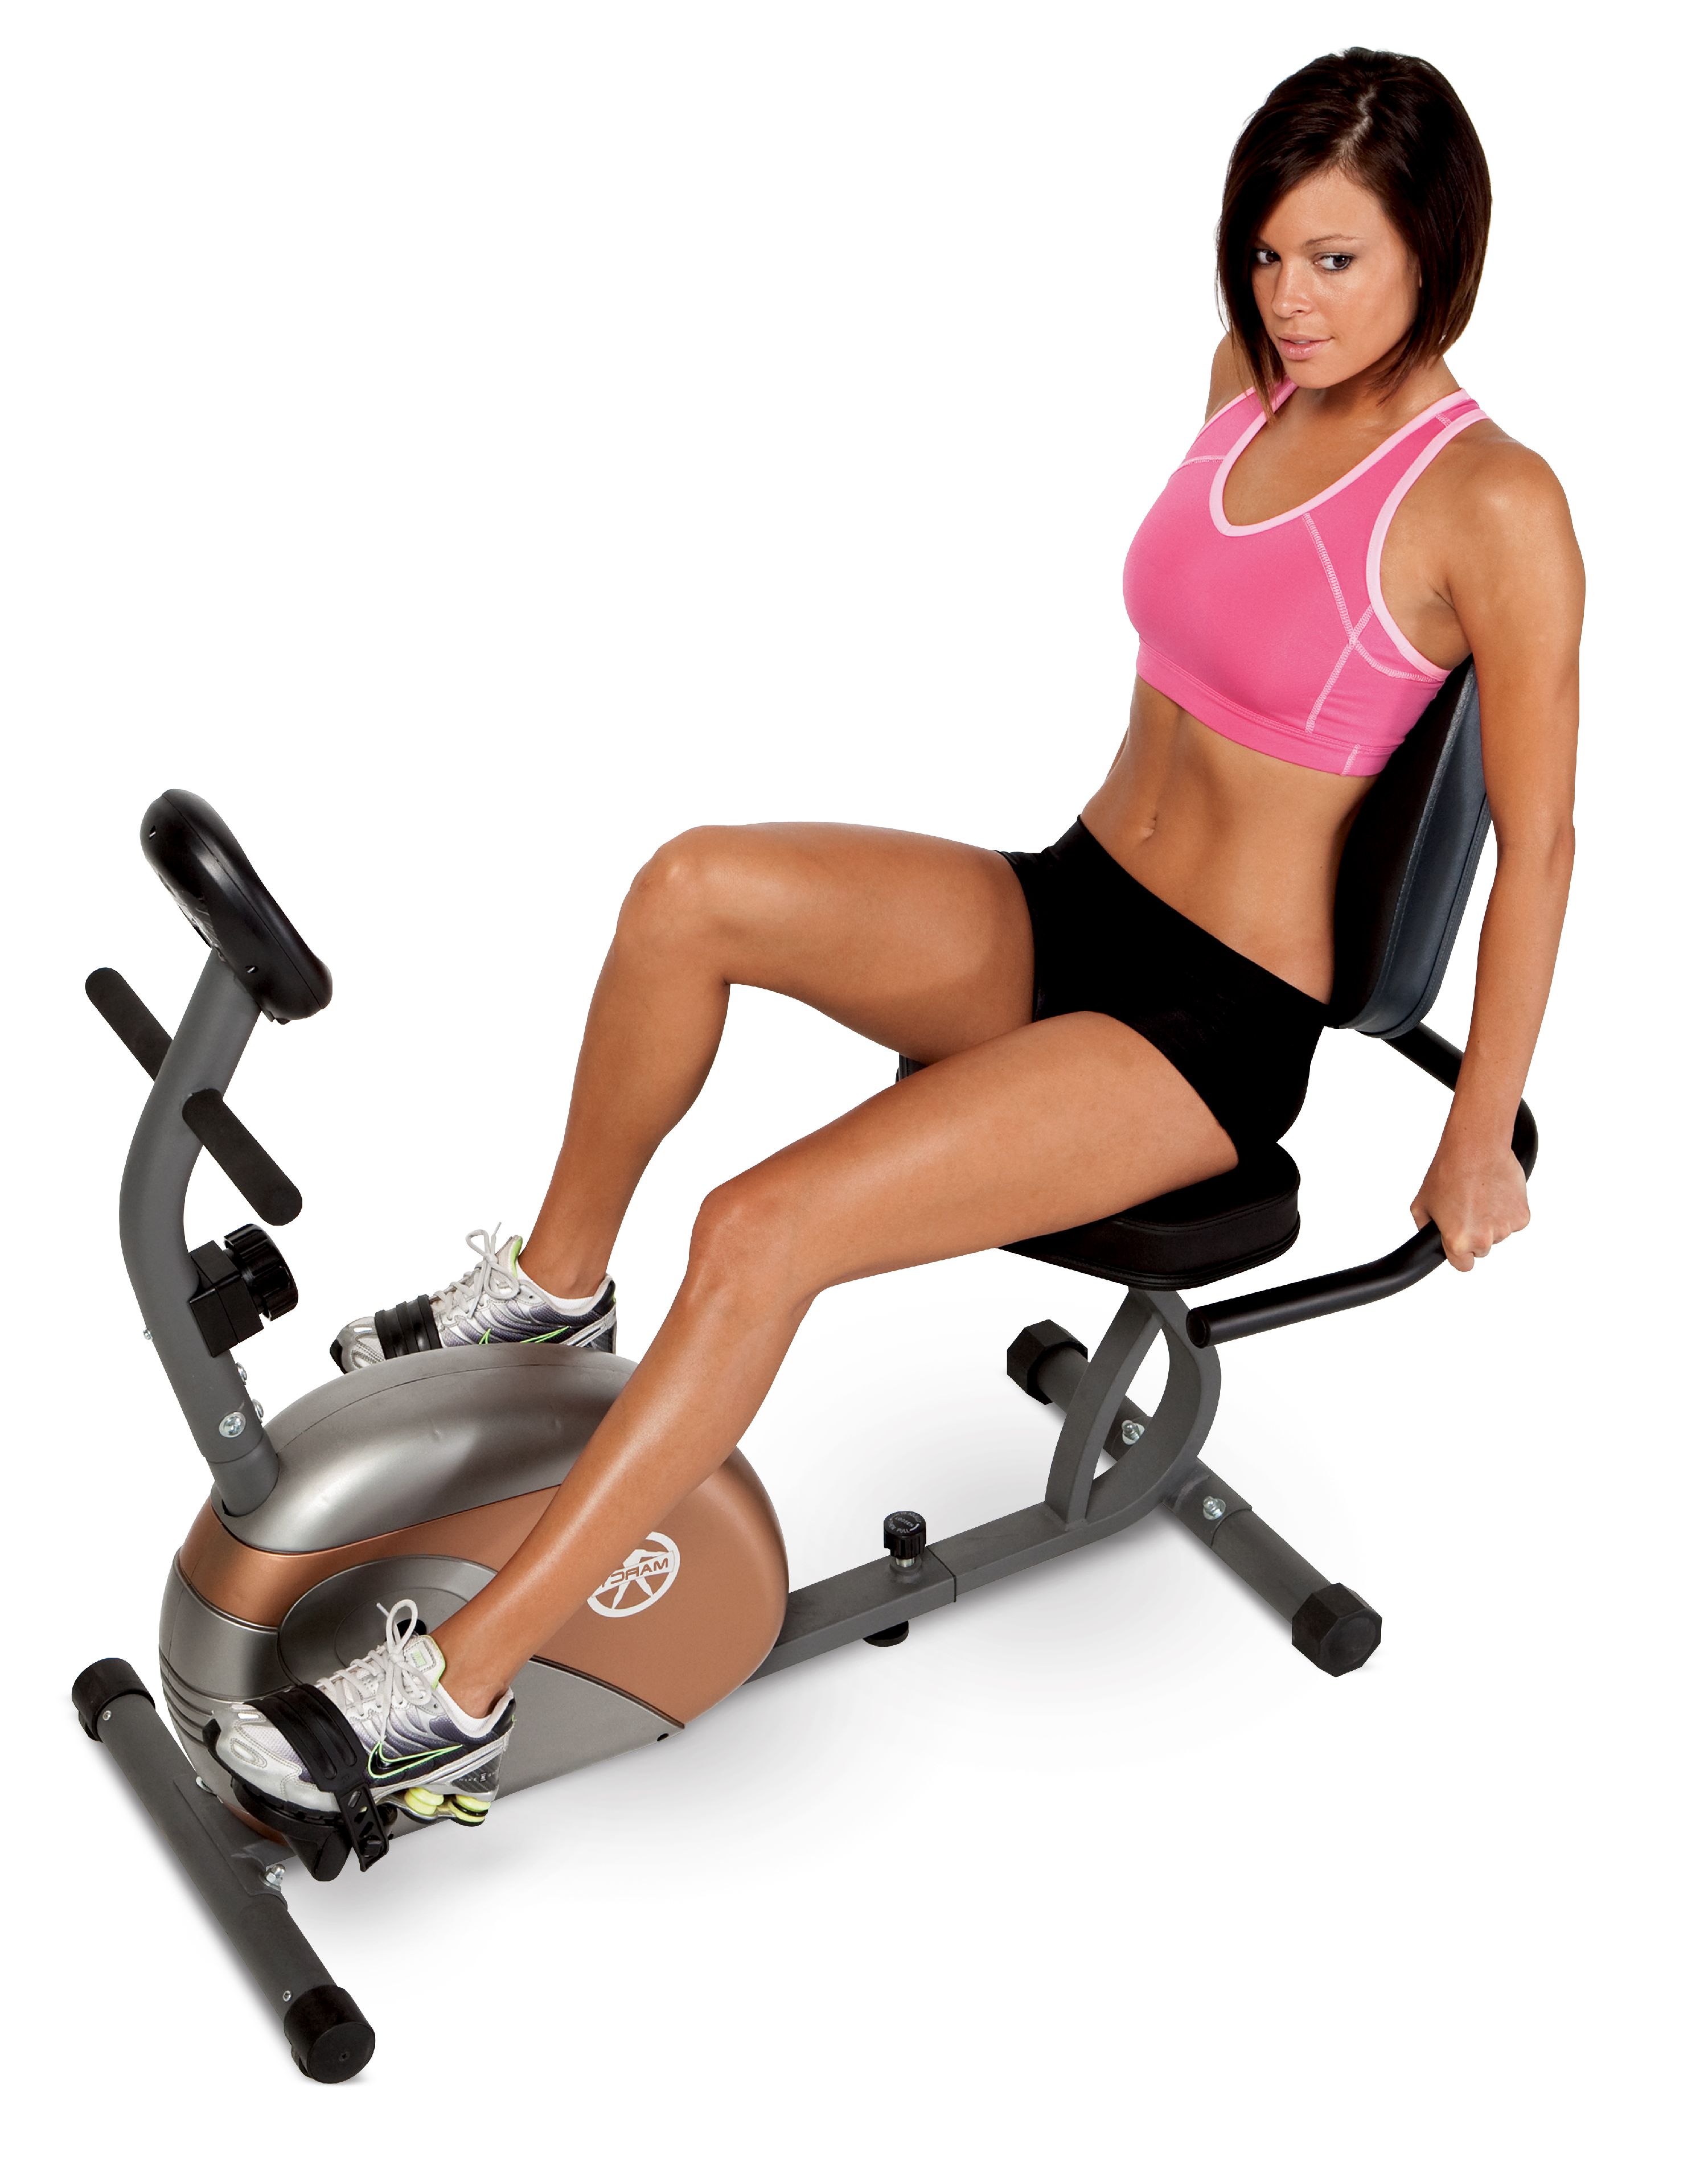 Marcy ME709 Recumbent Magnetic Exercise Bike Cycling Home Gym Equipment - image 3 of 5